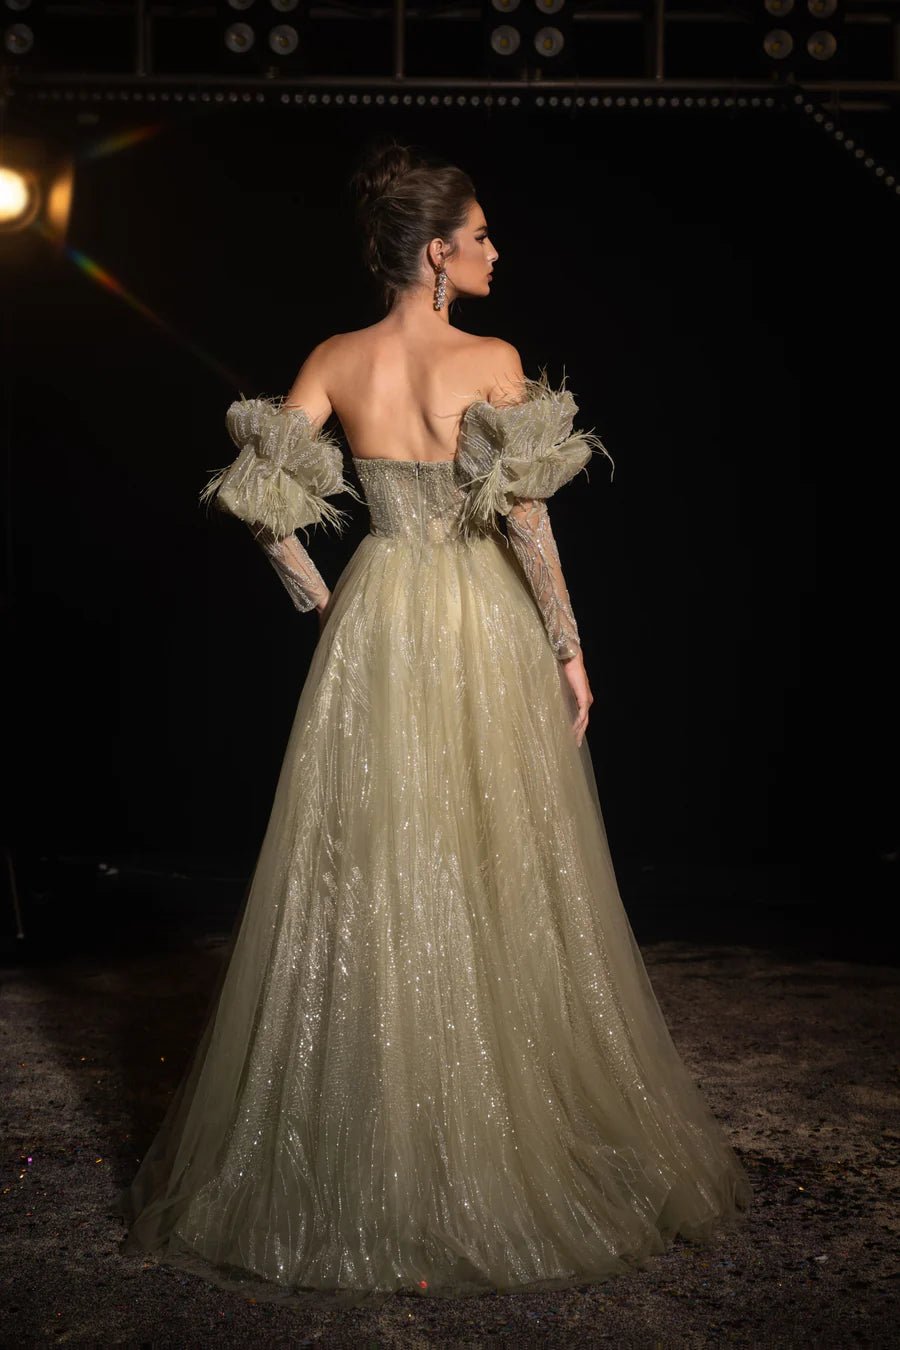 Luxurious Olive Green Sequin Evening Gown with Feathered Sleeves - Pretty Sequin Dress and Elegant Designer Gown Plus Size - WonderlandByLilian